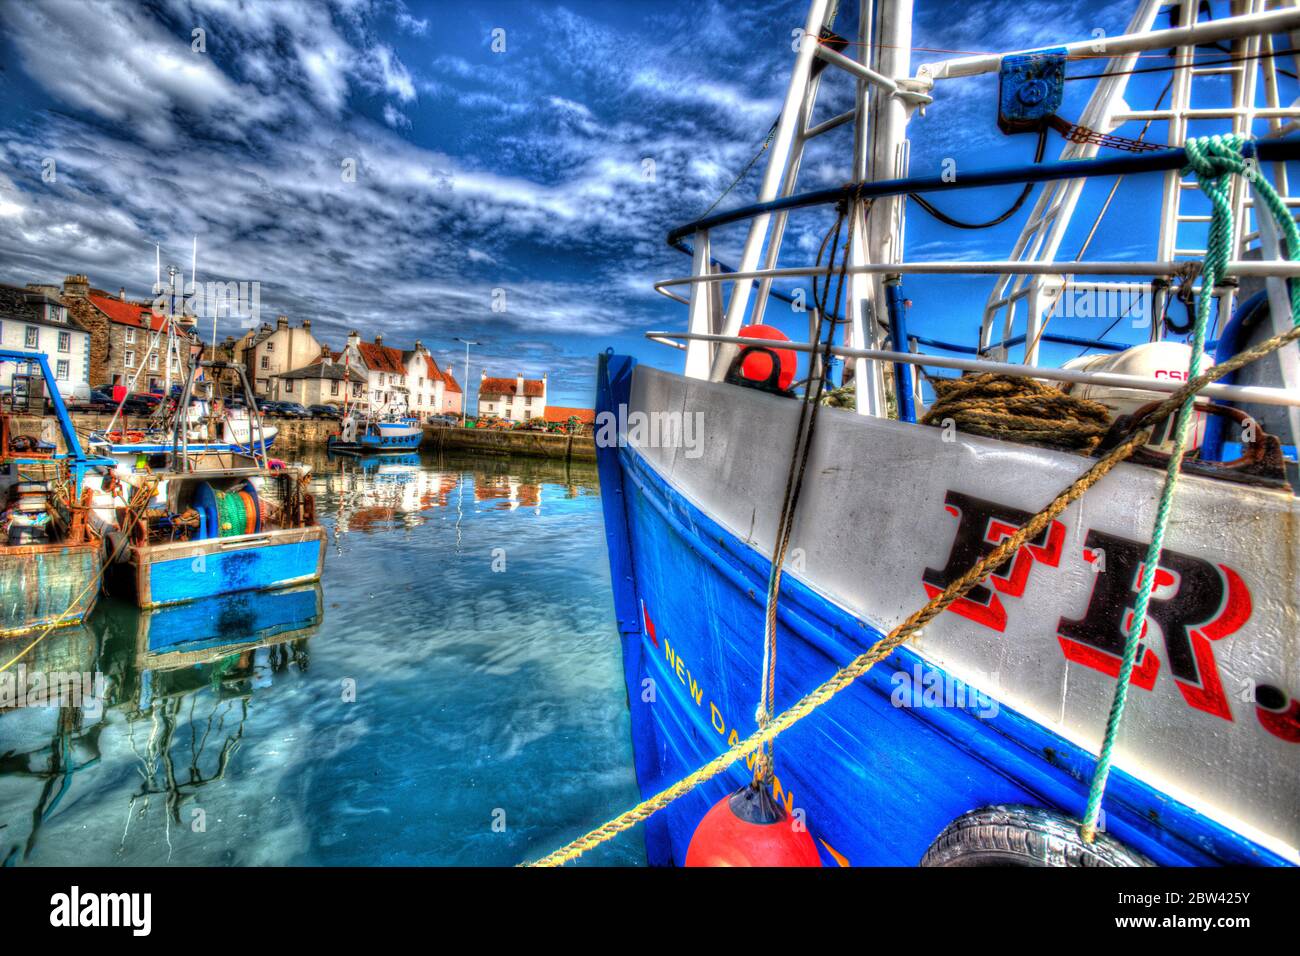 Village of Pittenweem, Scotland. Artistic view of Pittenweem Harbour, with fishing boats moored in the foreground. Stock Photo